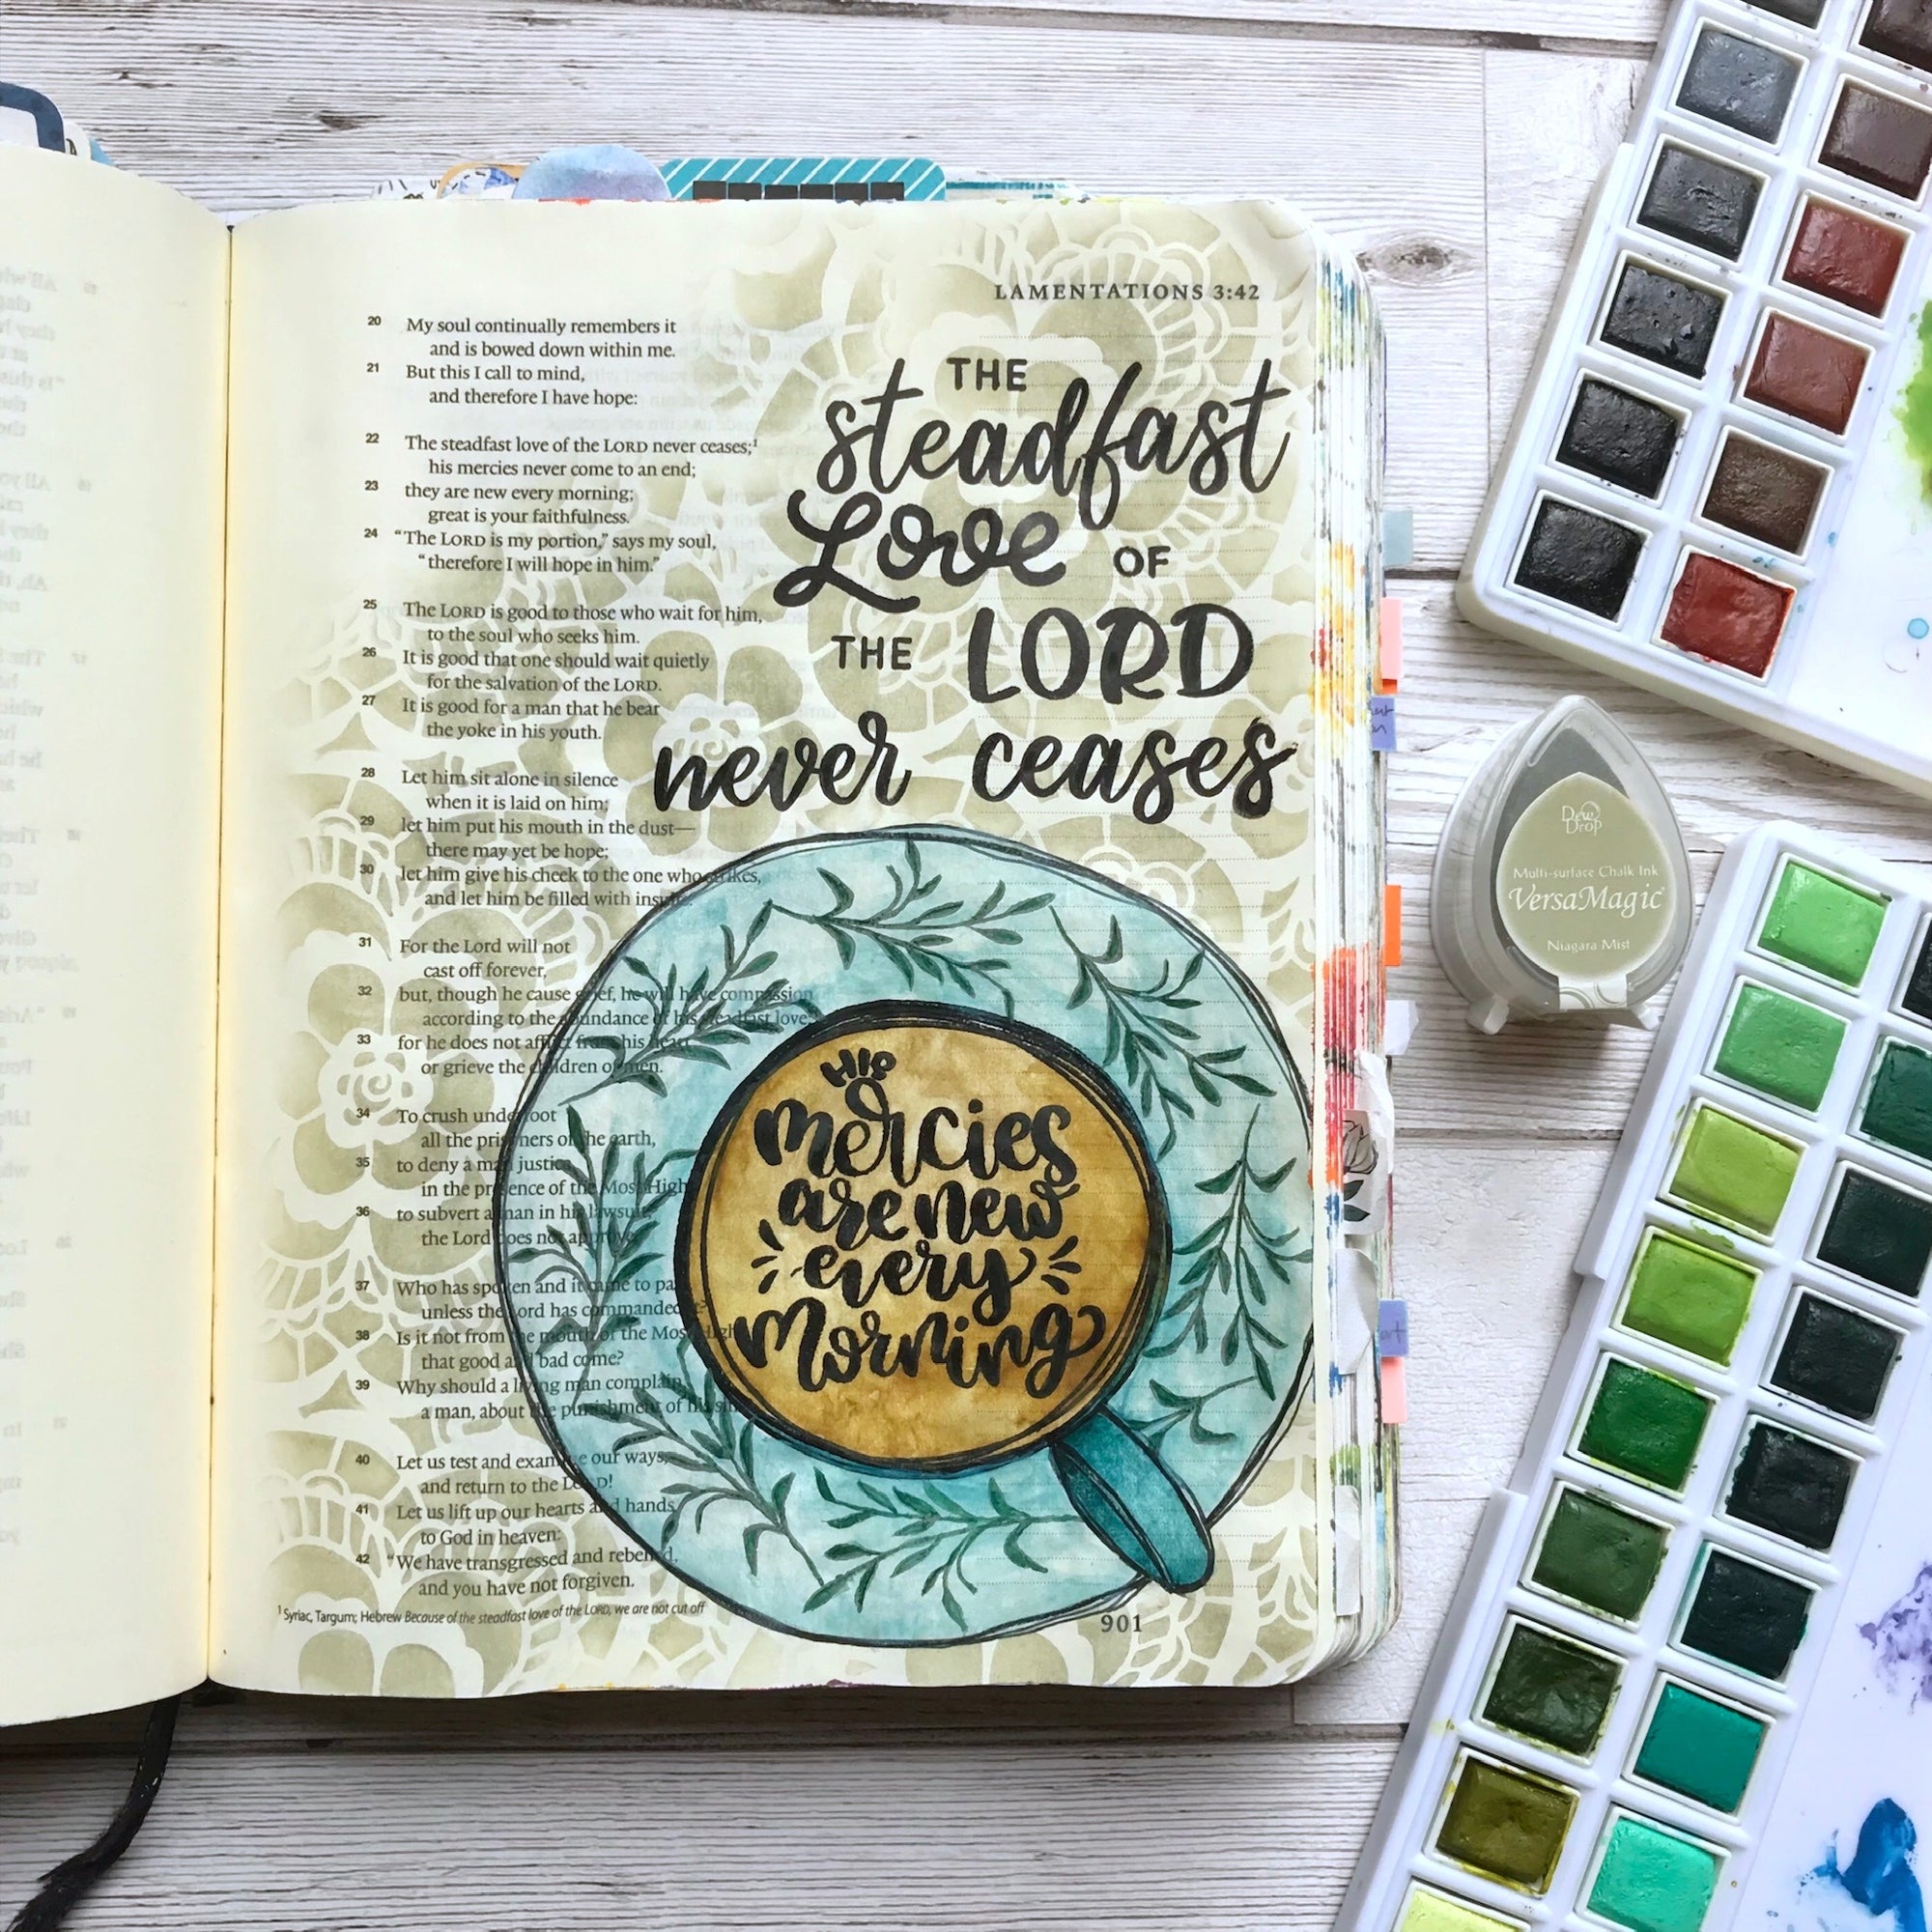 Bible Journal Stamps